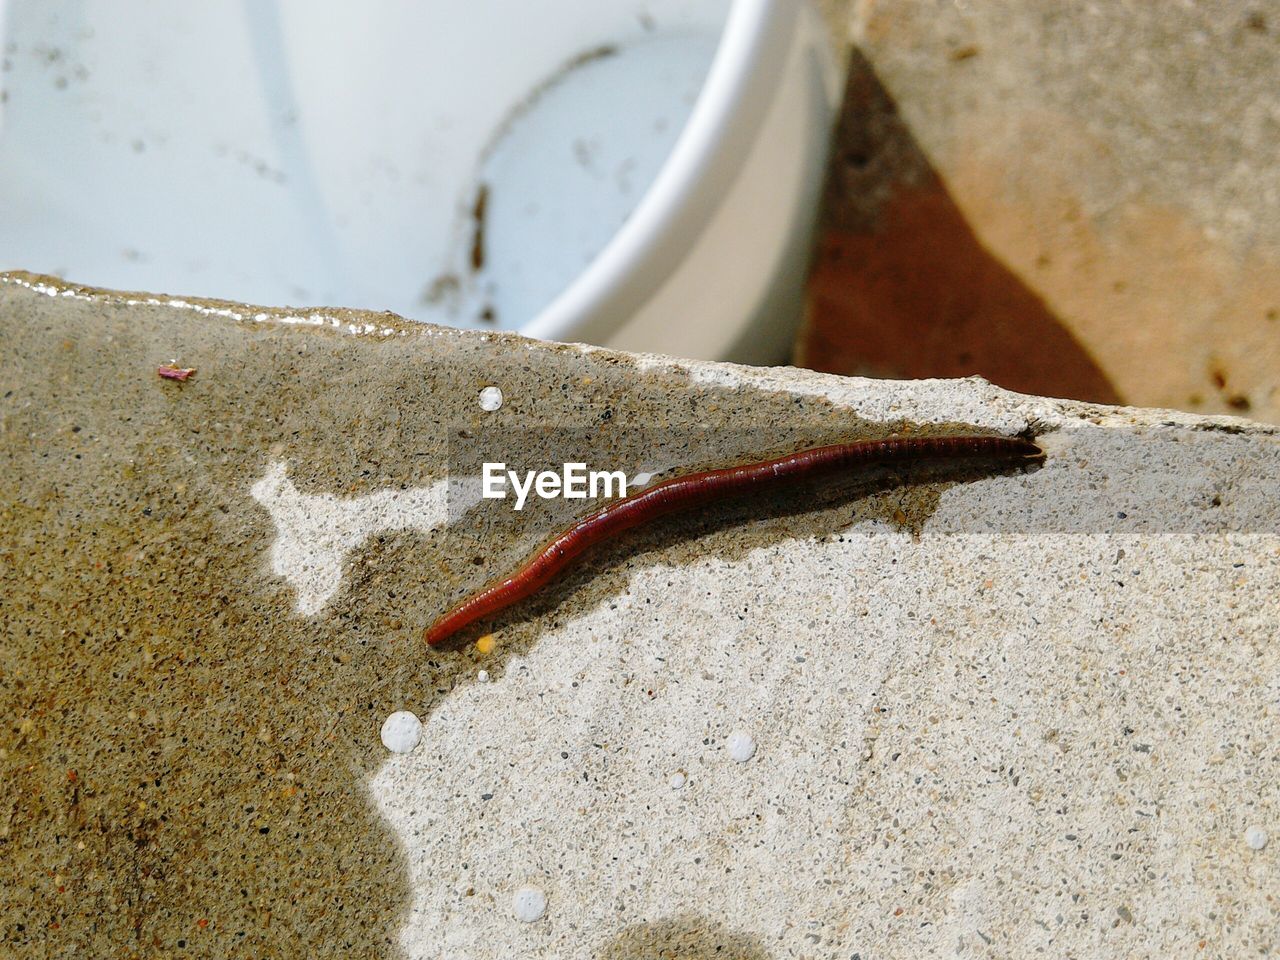 Close-up of earthworm on retaining wall